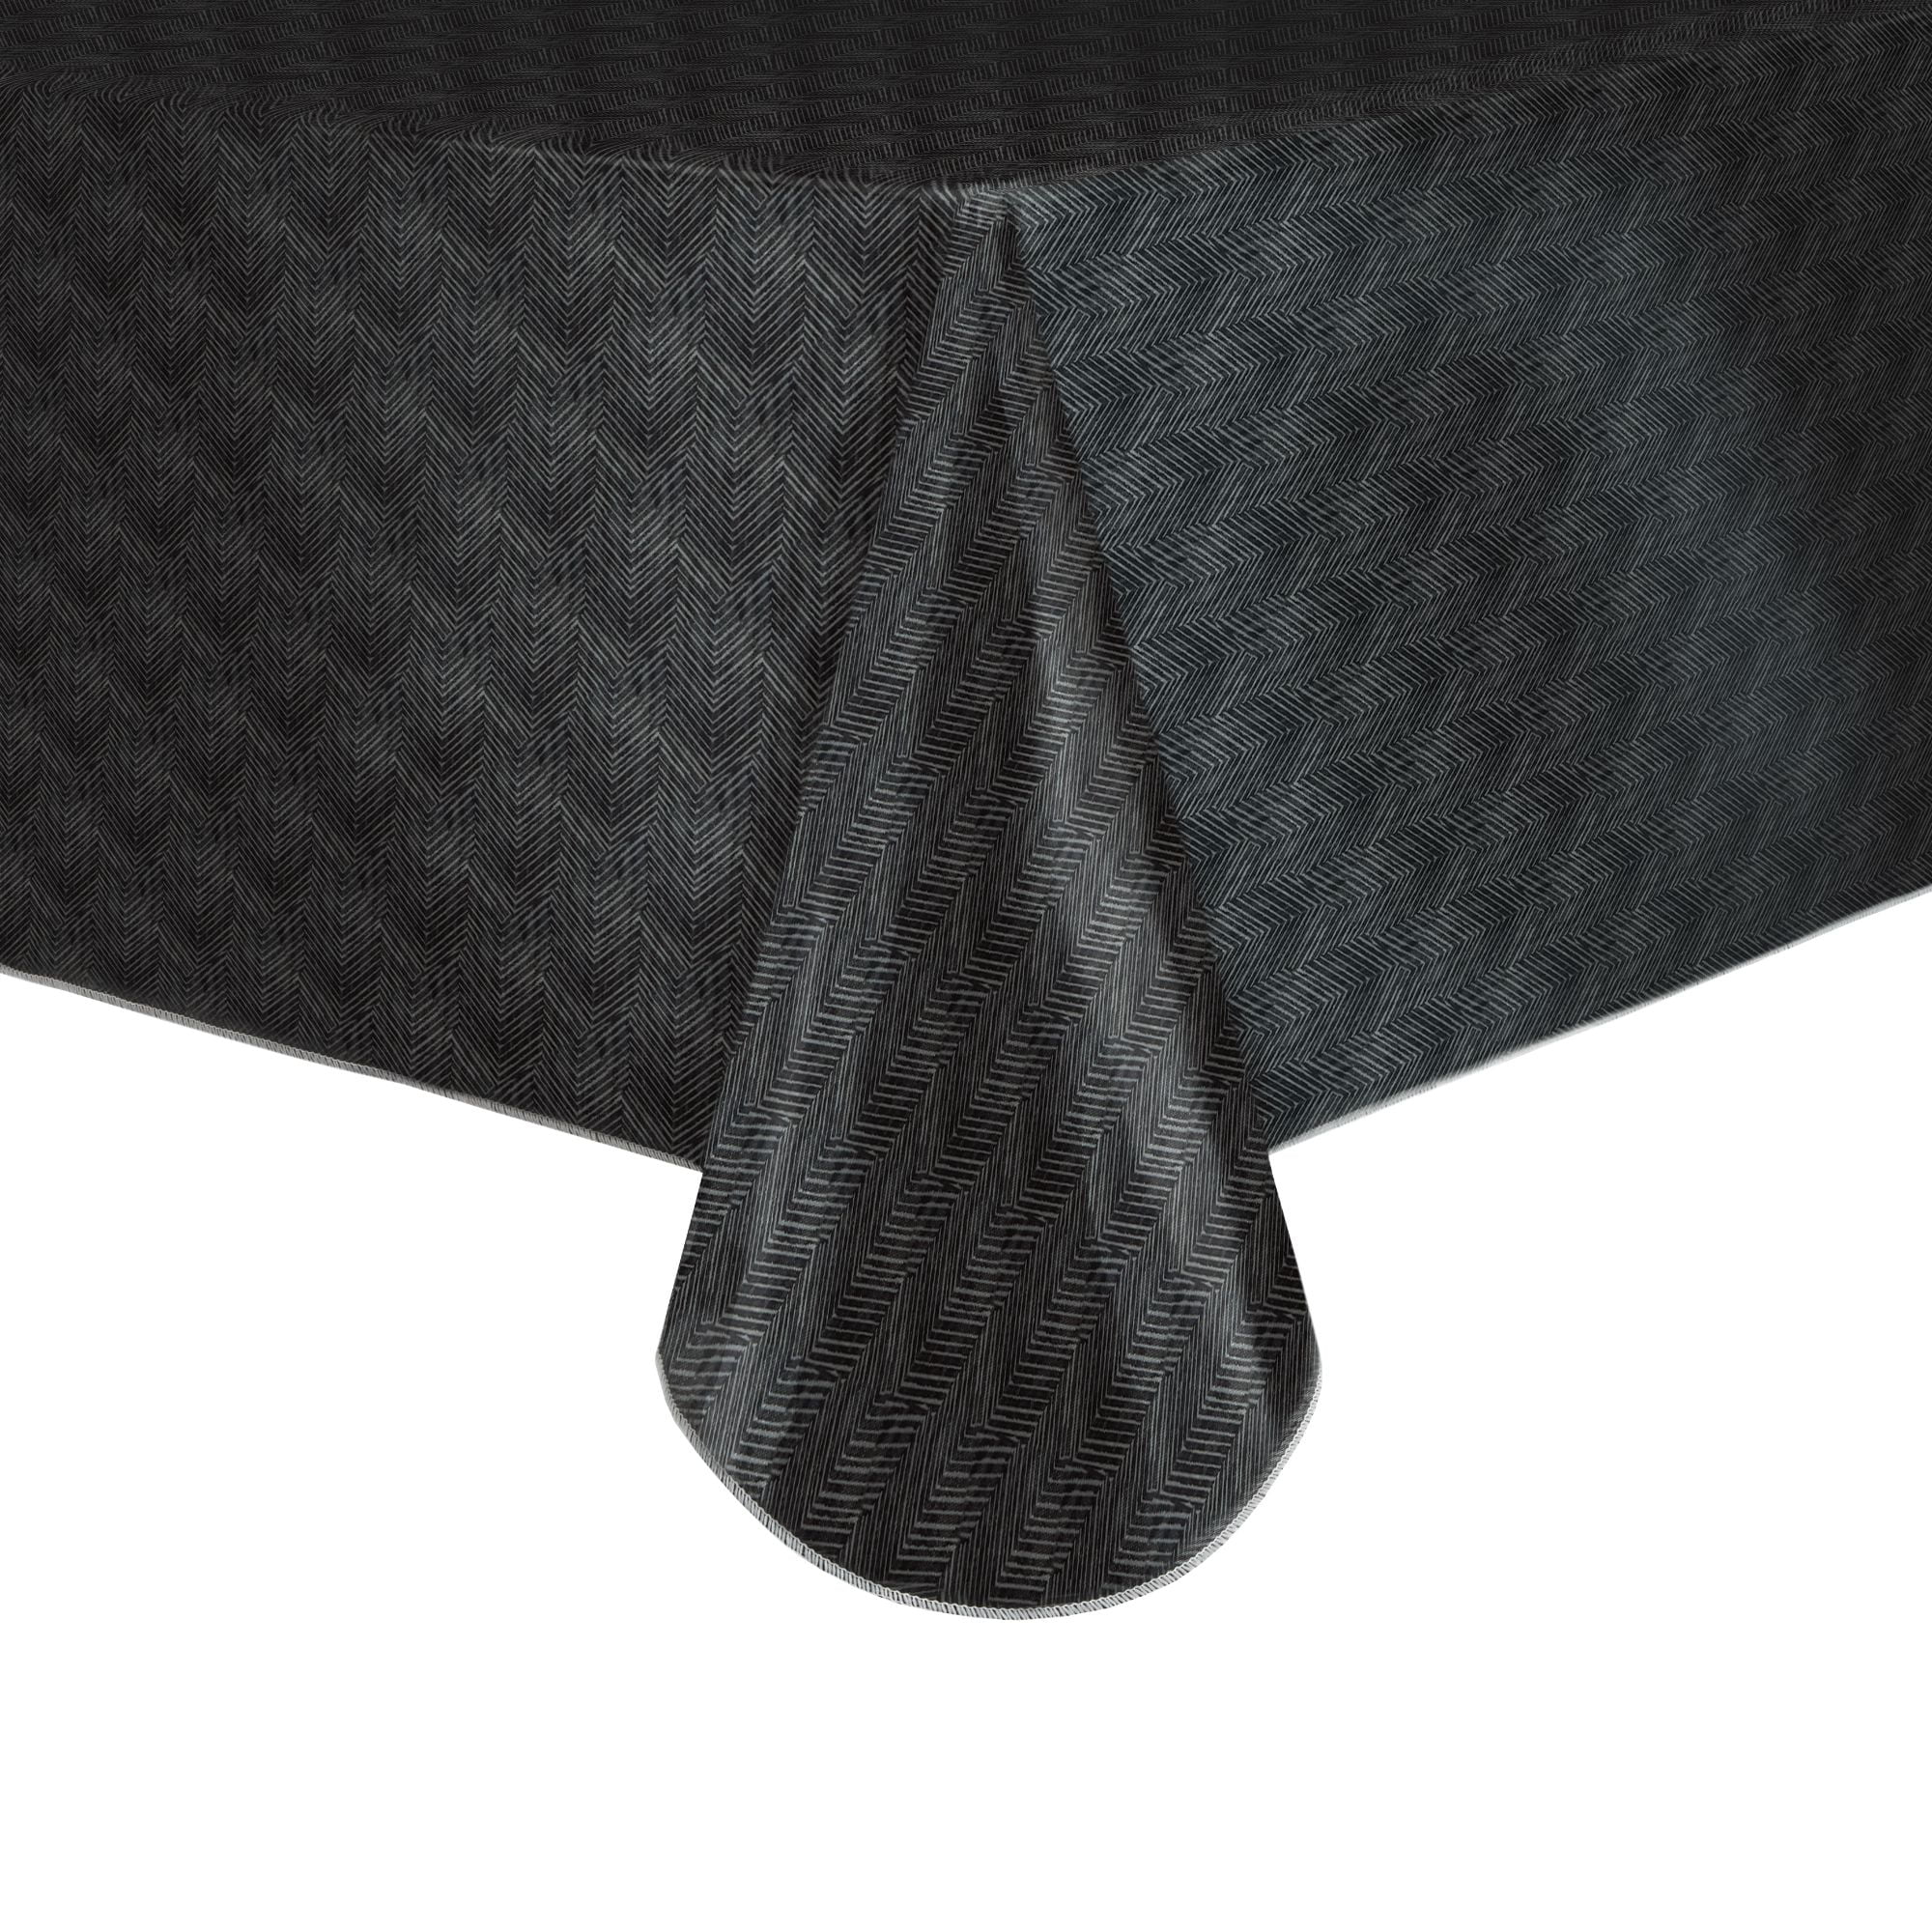 Mainstays Herringbone PEVA Tablecloth, Black, 60"W x 84"L Rectangle, Available in various sizes and colors